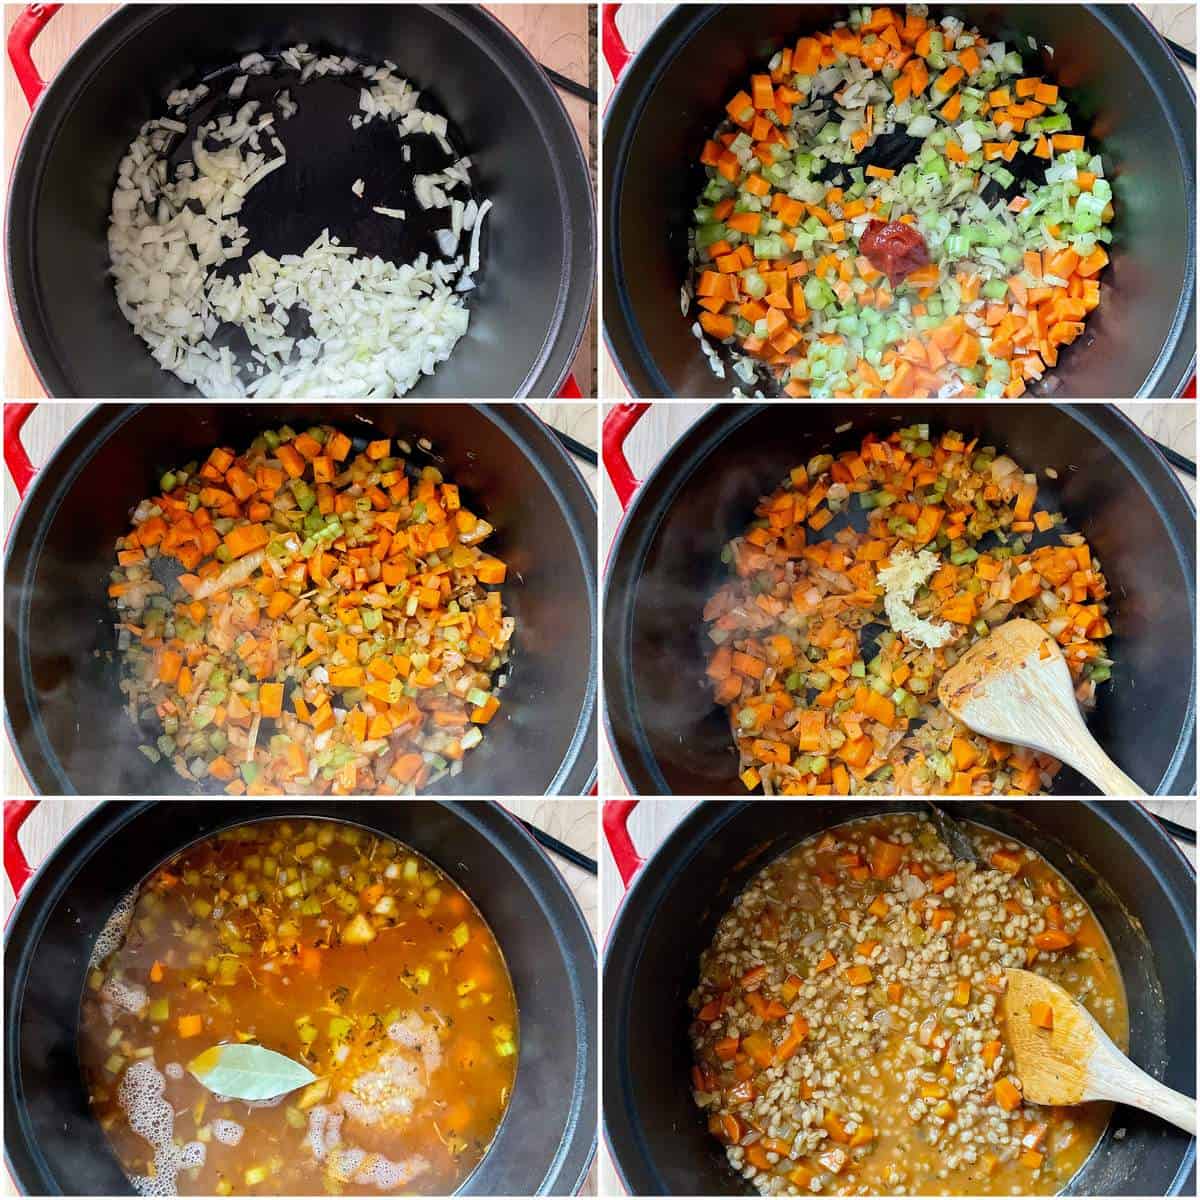 A step-by step photo tutorial of how to make barley soup with vegetables.